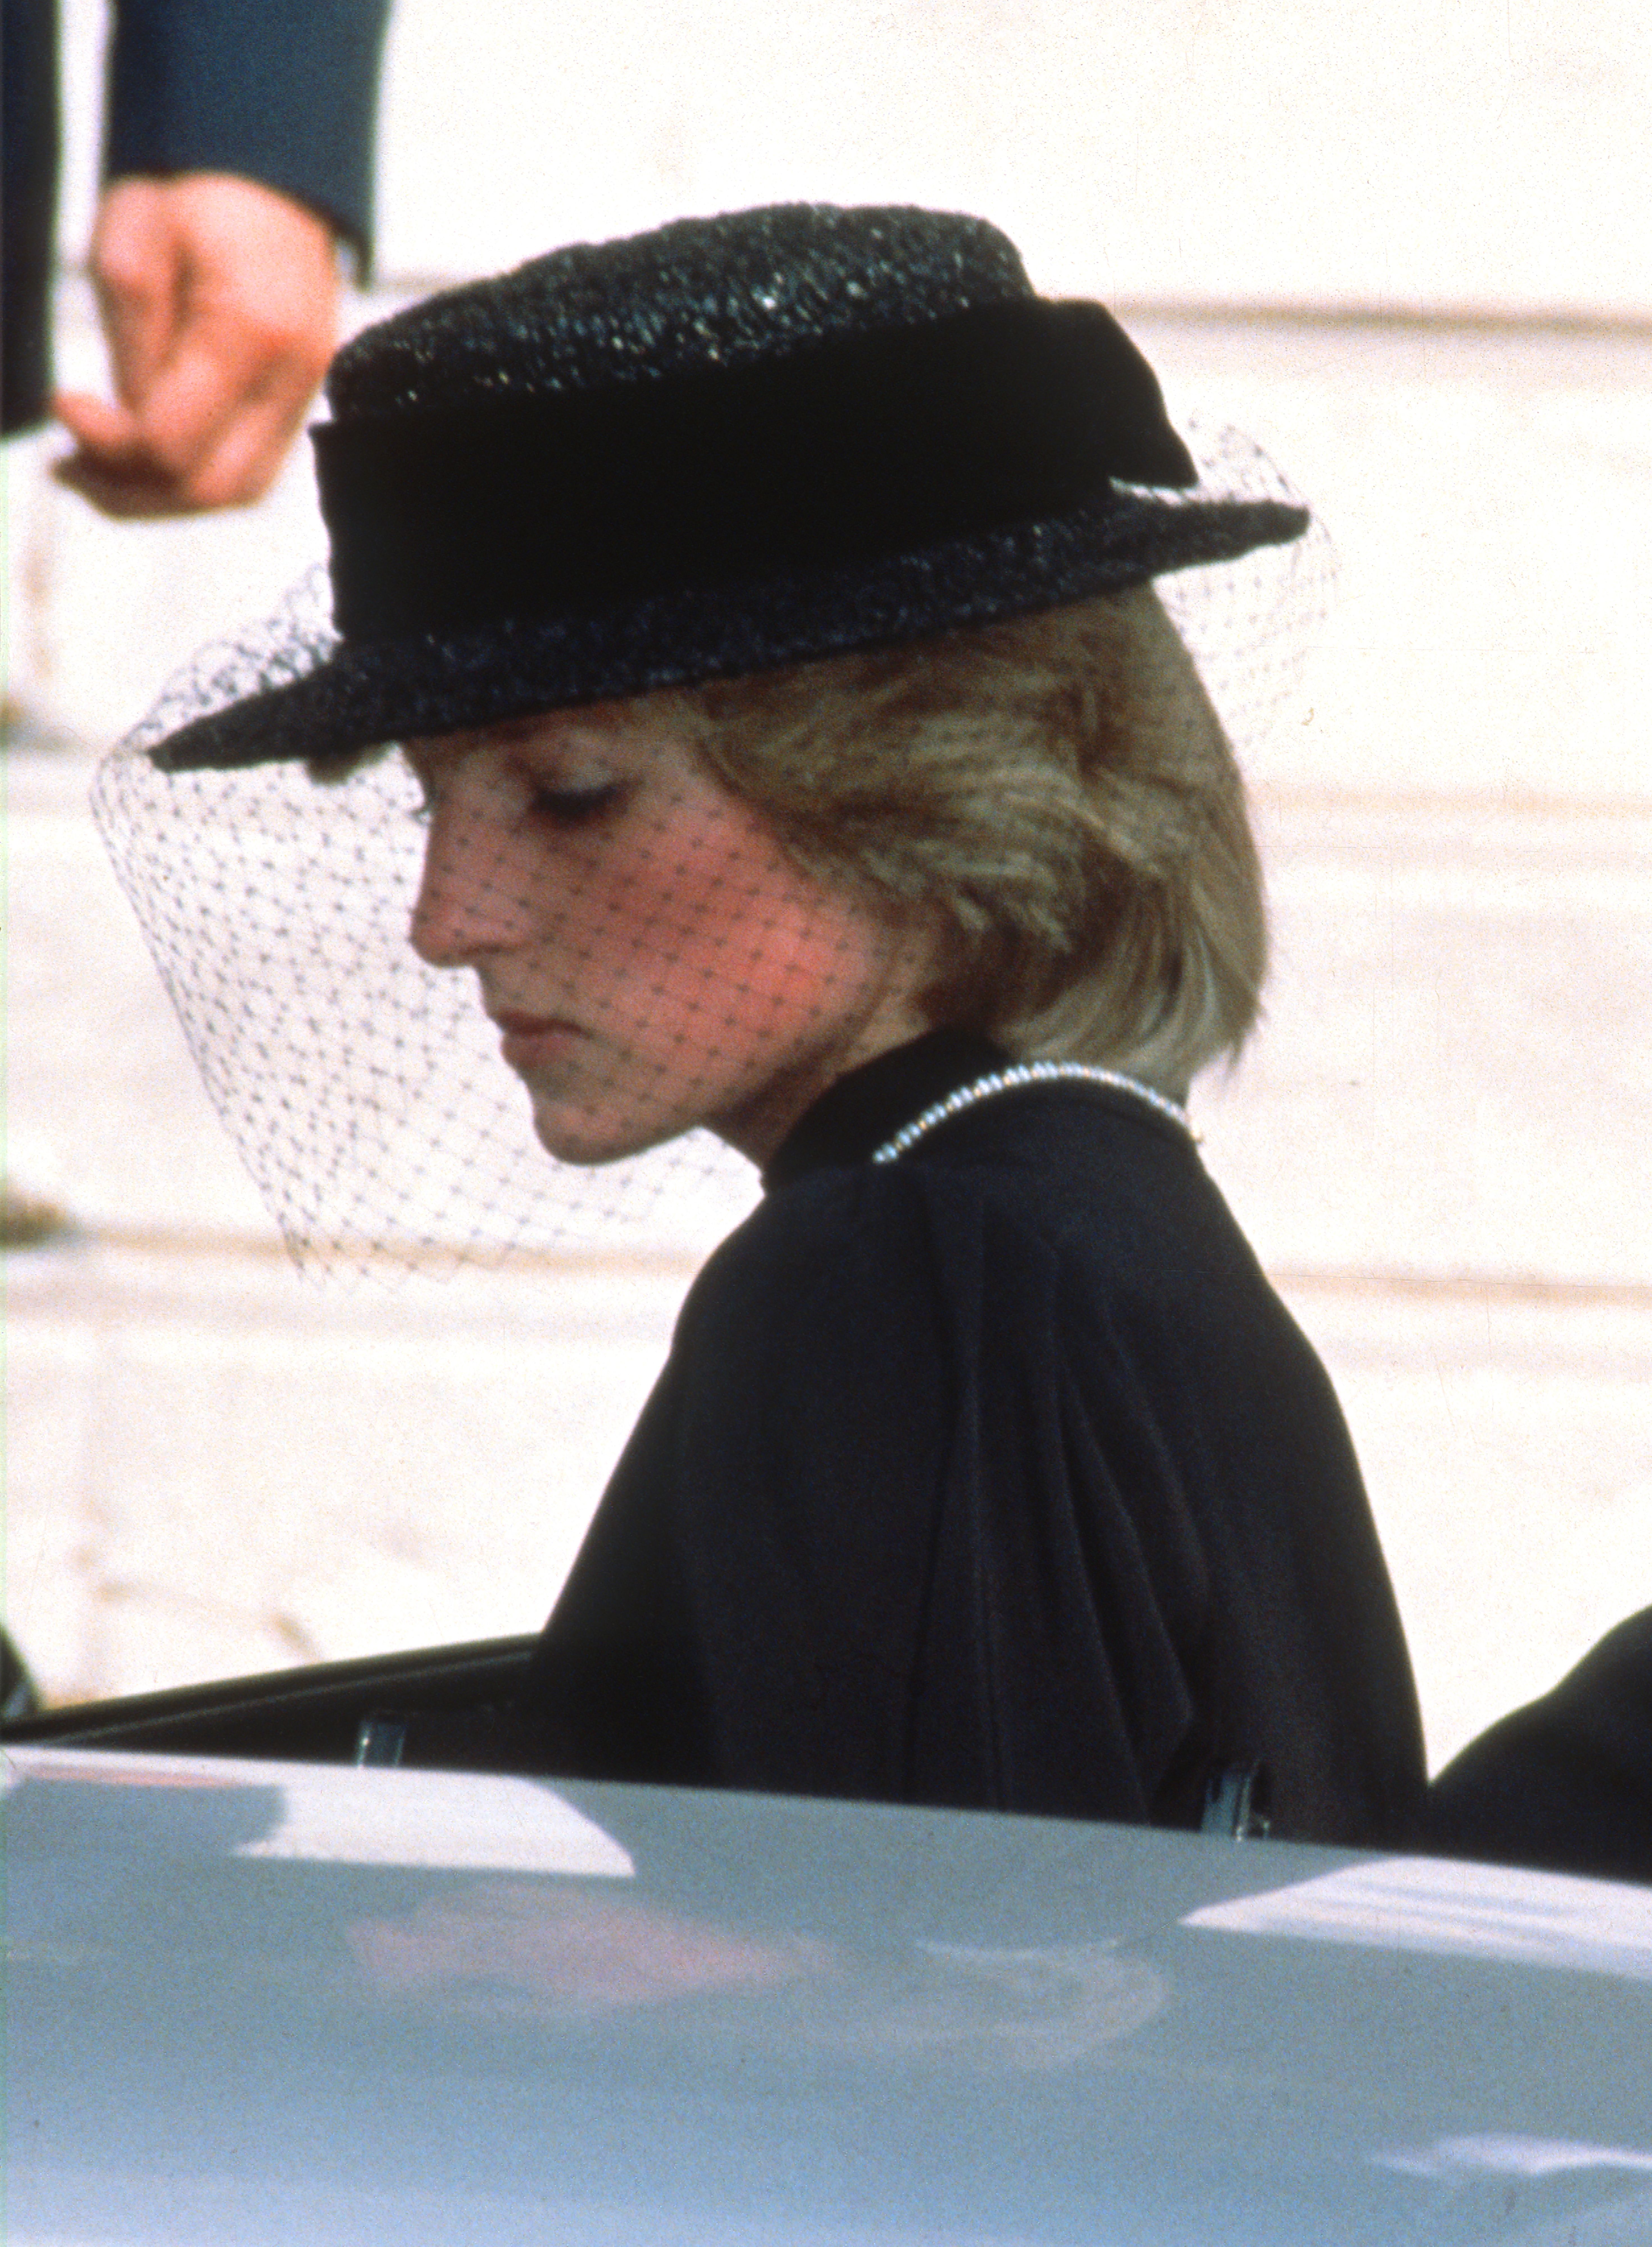 Princess Diana at the funeral of Princess Grace of Monaco on September 18, 1982, in Monaco. | Source: Anwar Hussein/Getty Images